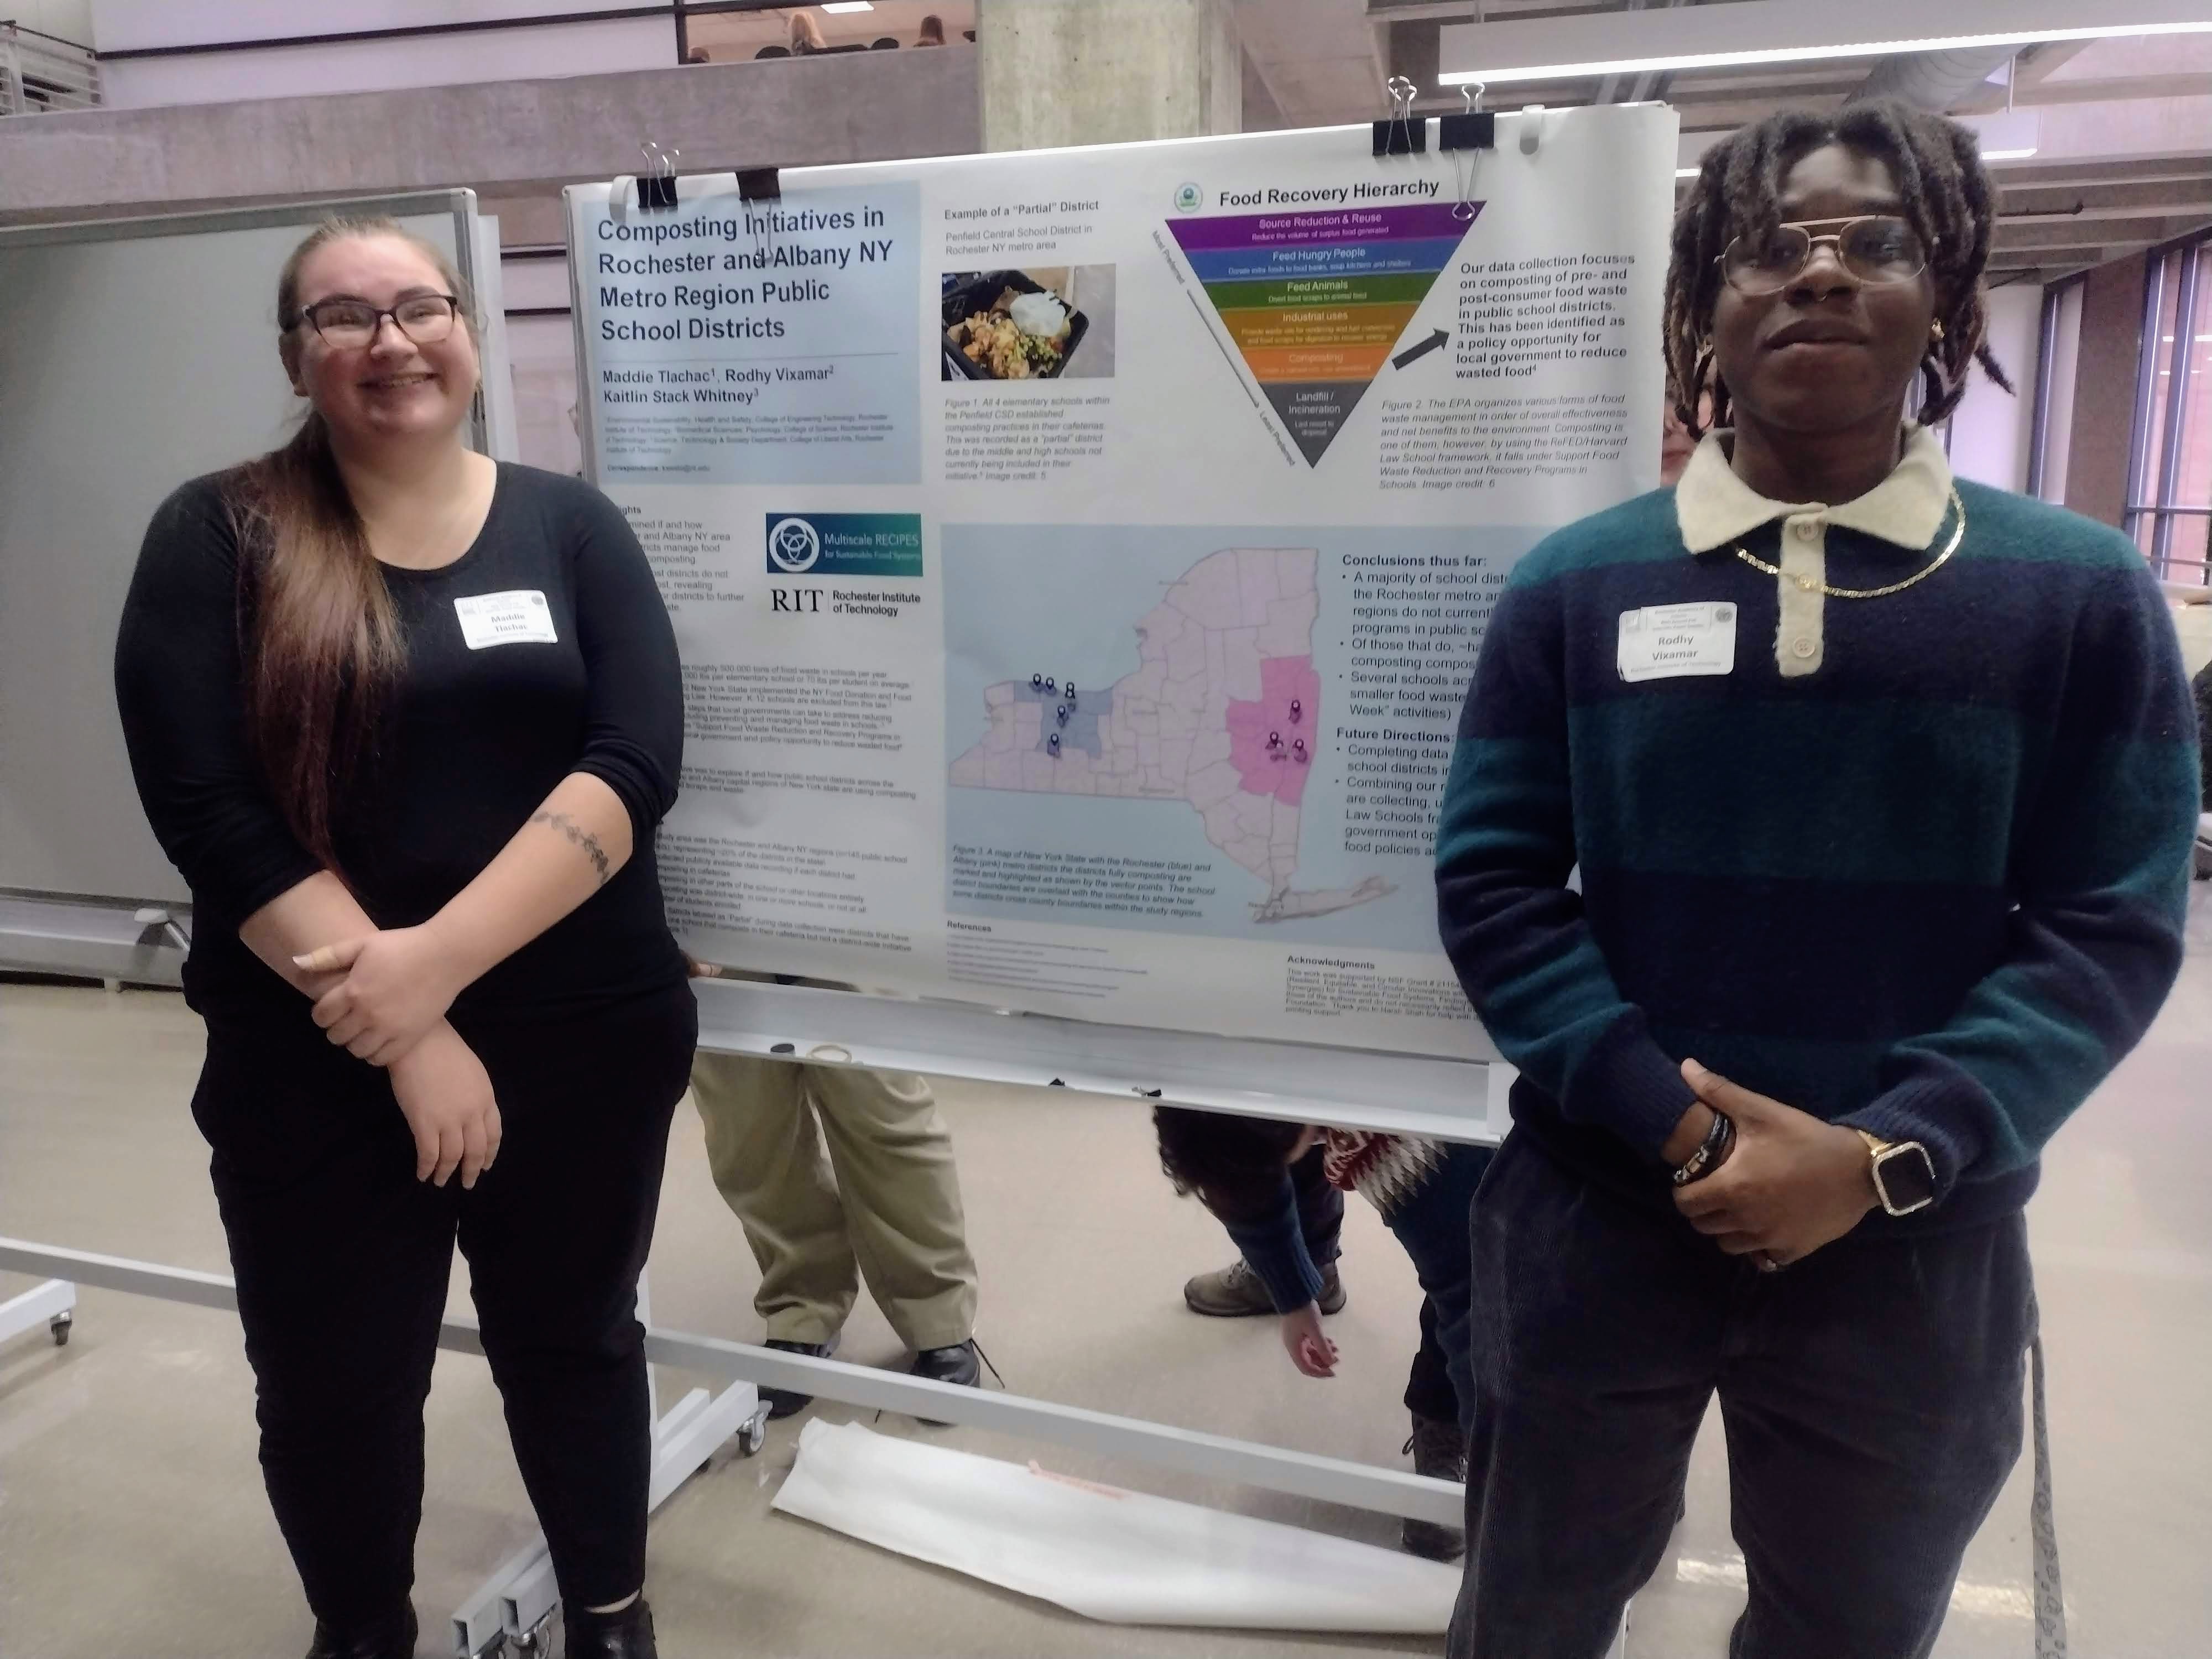 two people in dark clothes and glasses (Maddie and Rodhy) smile at the camera, standing with their research poster between them